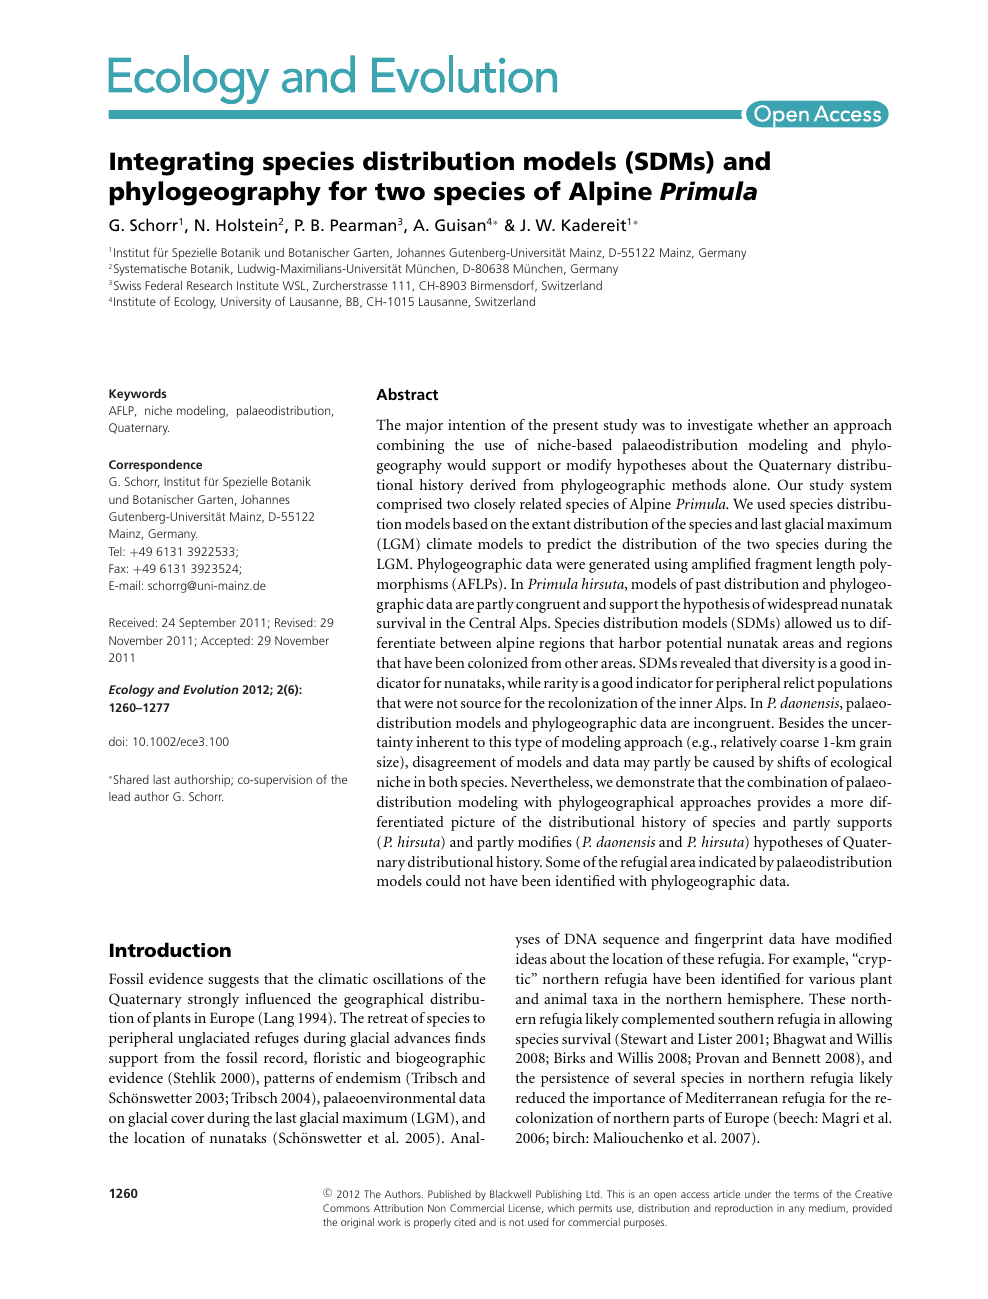 Integrating Species Distribution Models Sdms And Phylogeography For Two Species Of Alpine Primula Topic Of Research Paper In Biological Sciences Download Scholarly Article Pdf And Read For Free On Cyberleninka Open